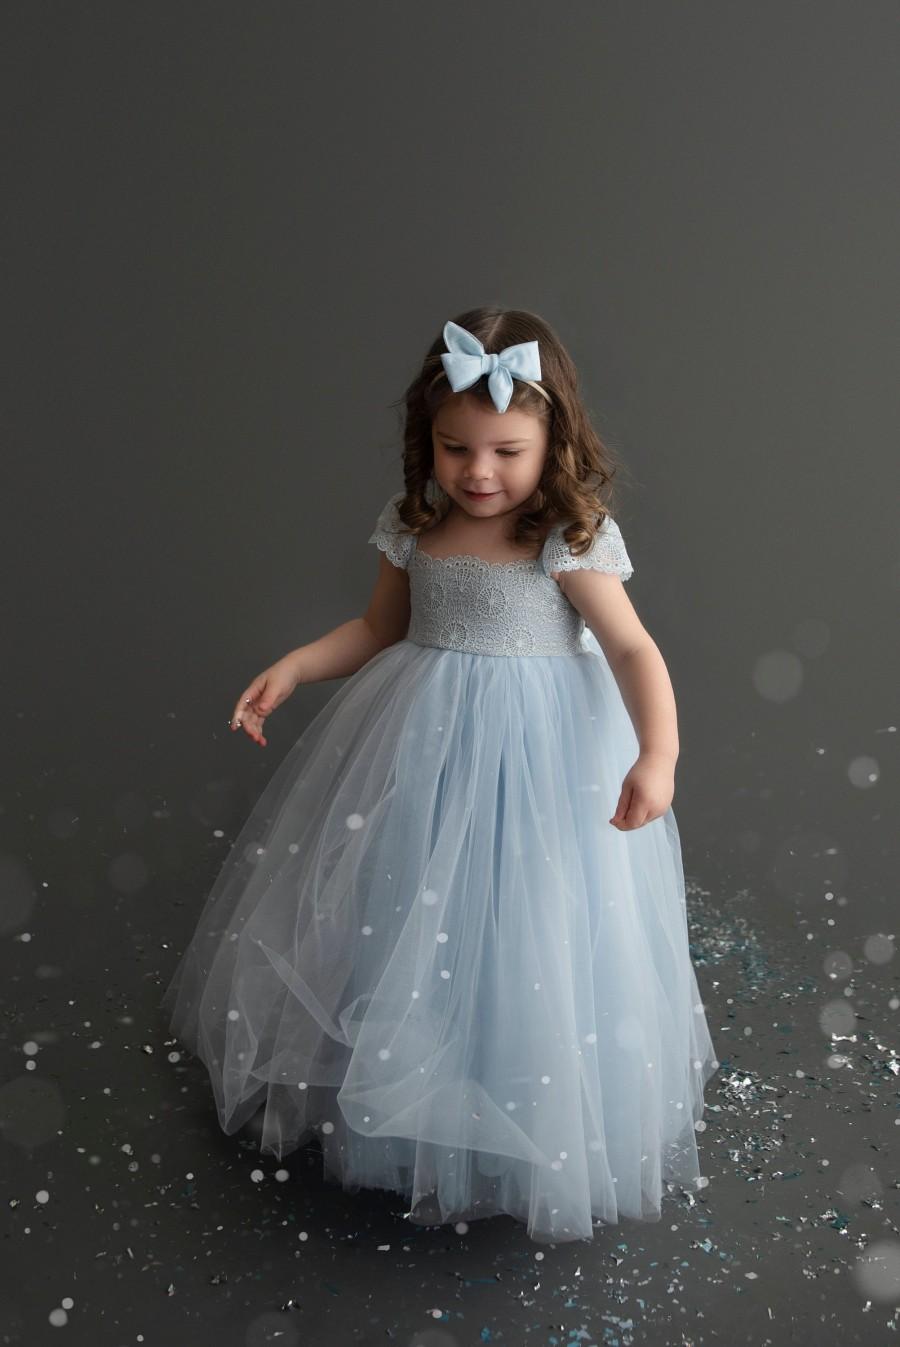 Mariage - Tulip Light Blue Flower Girl Dress Dresses Ice Outfit Girls Tulle Lace Newborn Princess 1st Birthday Tutu Baby Gown Photoshoot Infant Formal